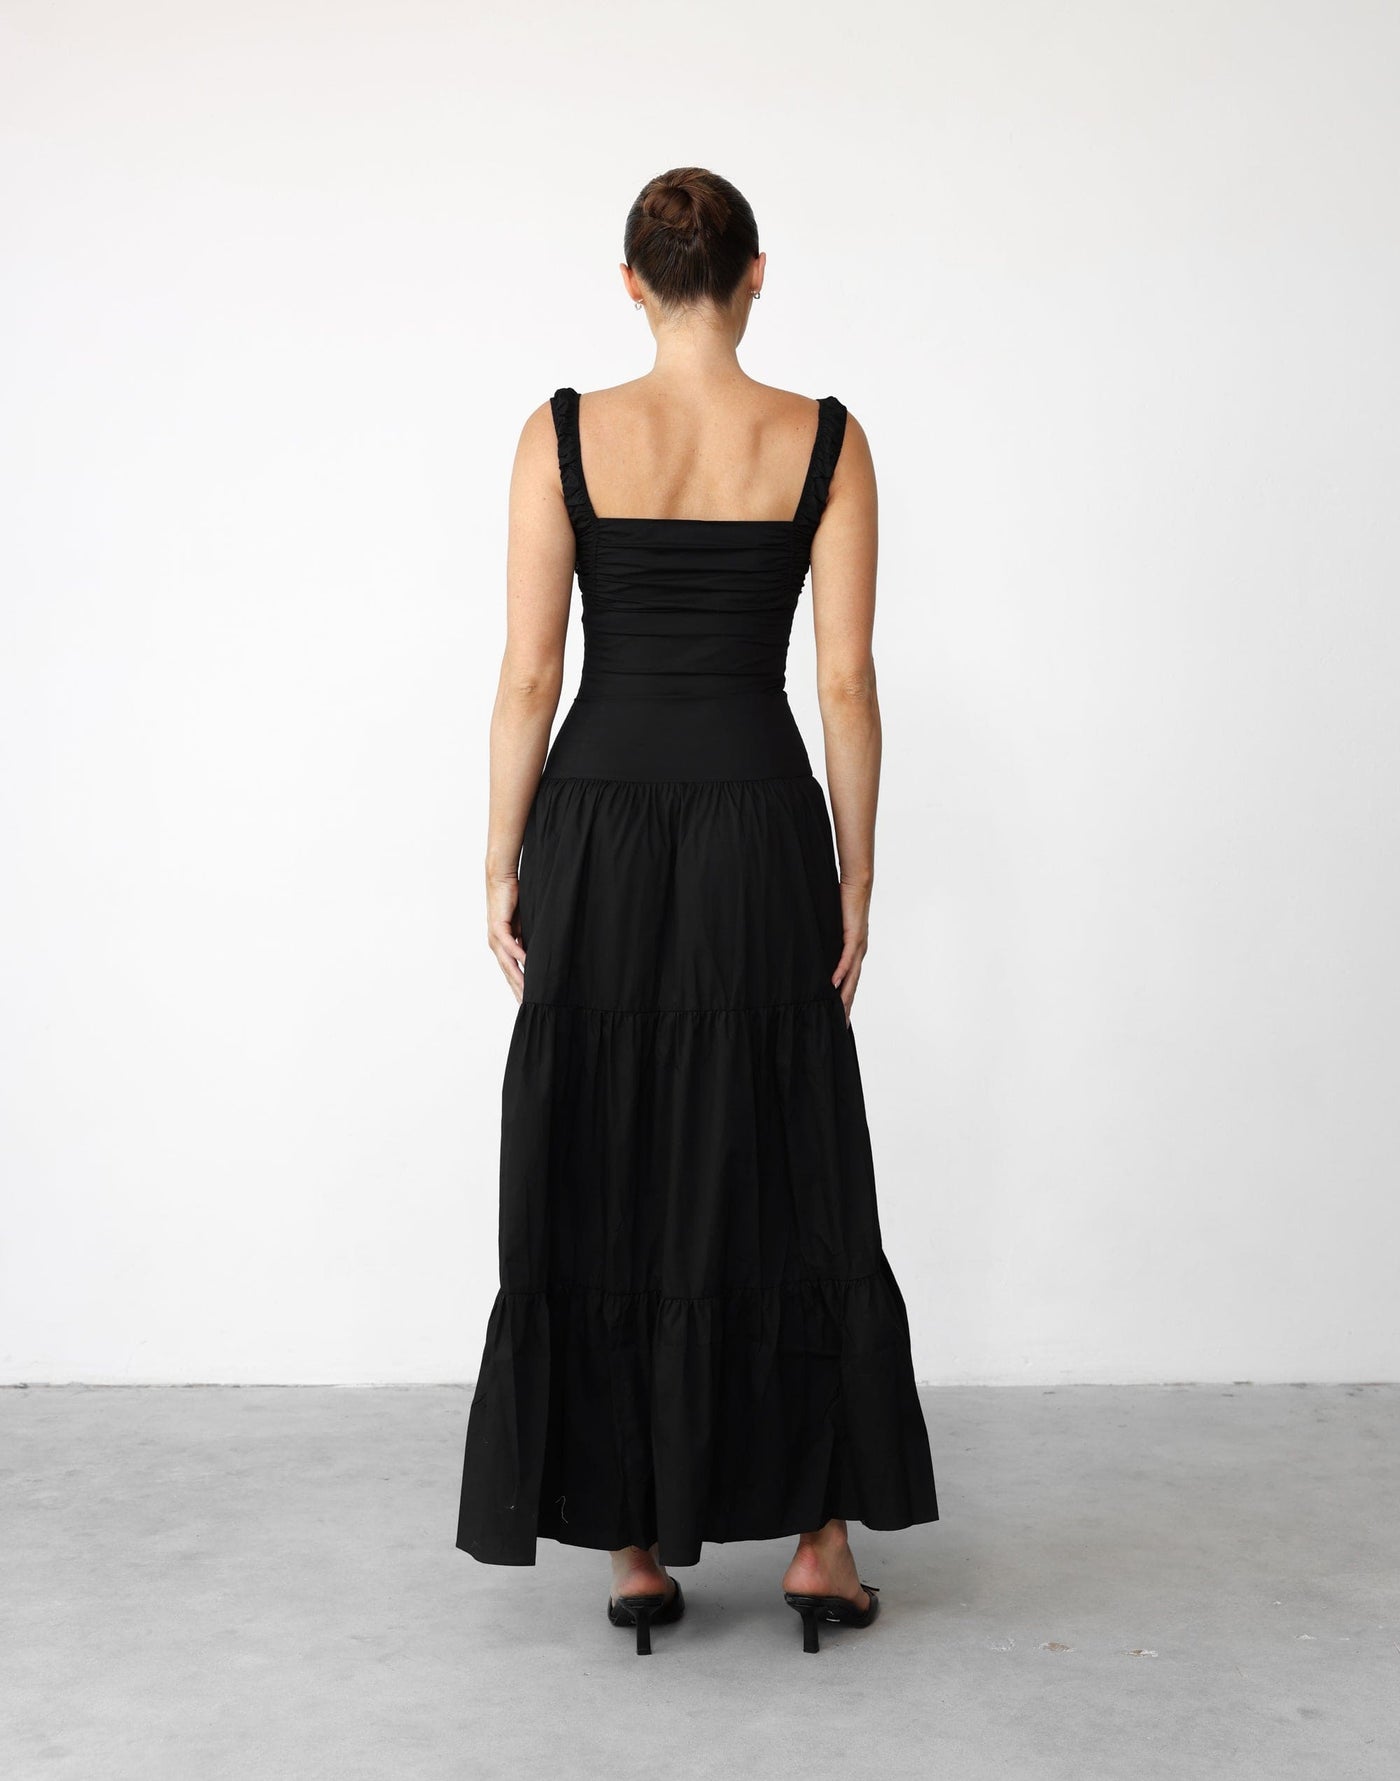 Heart Shaped Maxi (Onyx) - By Lioness - Corset Upper Ruched Maxi - Women's Dress - Charcoal Clothing